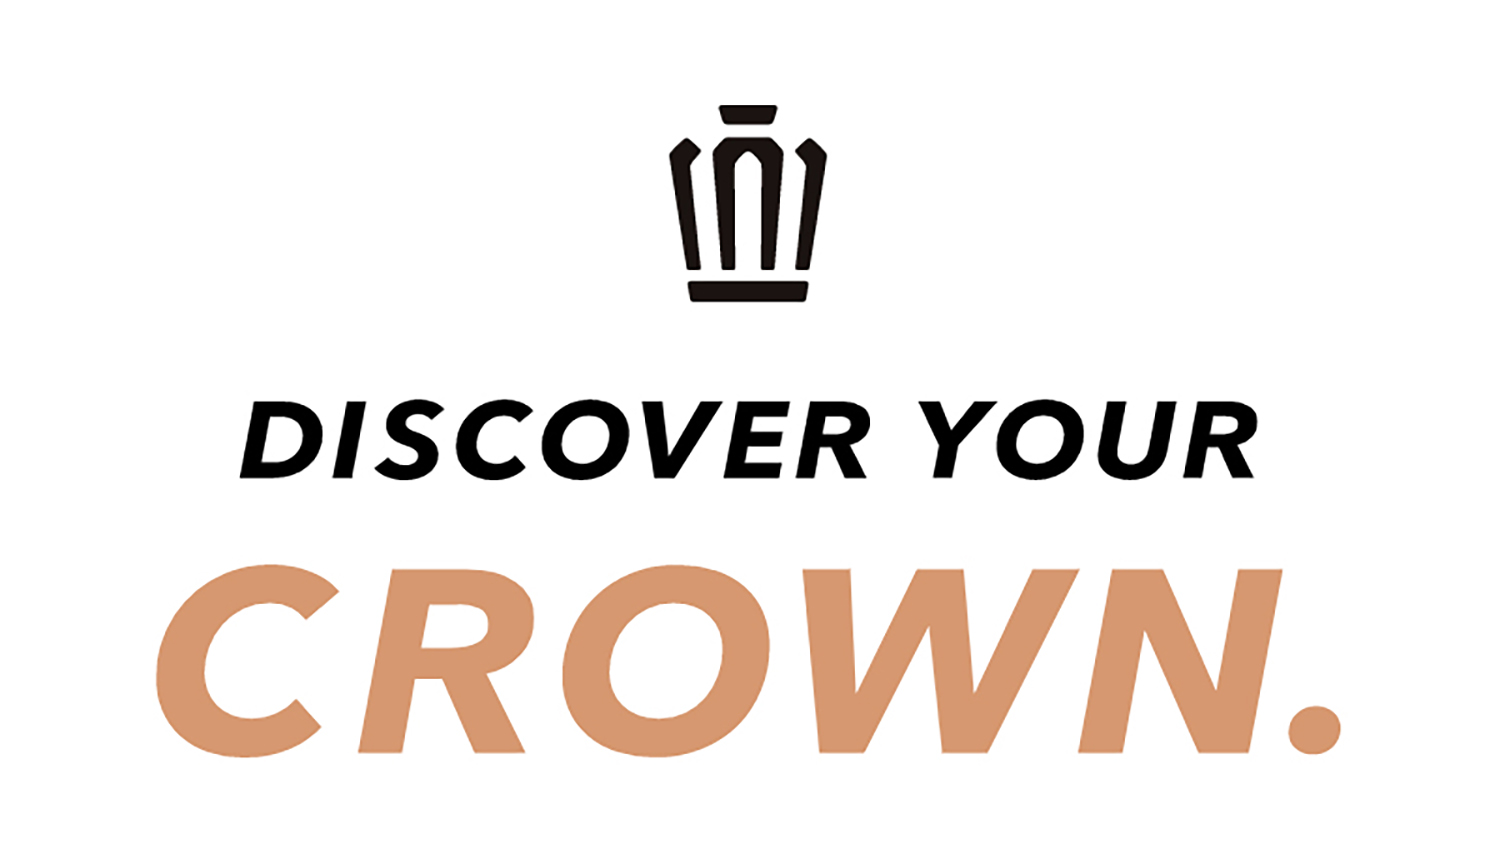 DISCOVER YOUR CROWN 〜 画像6